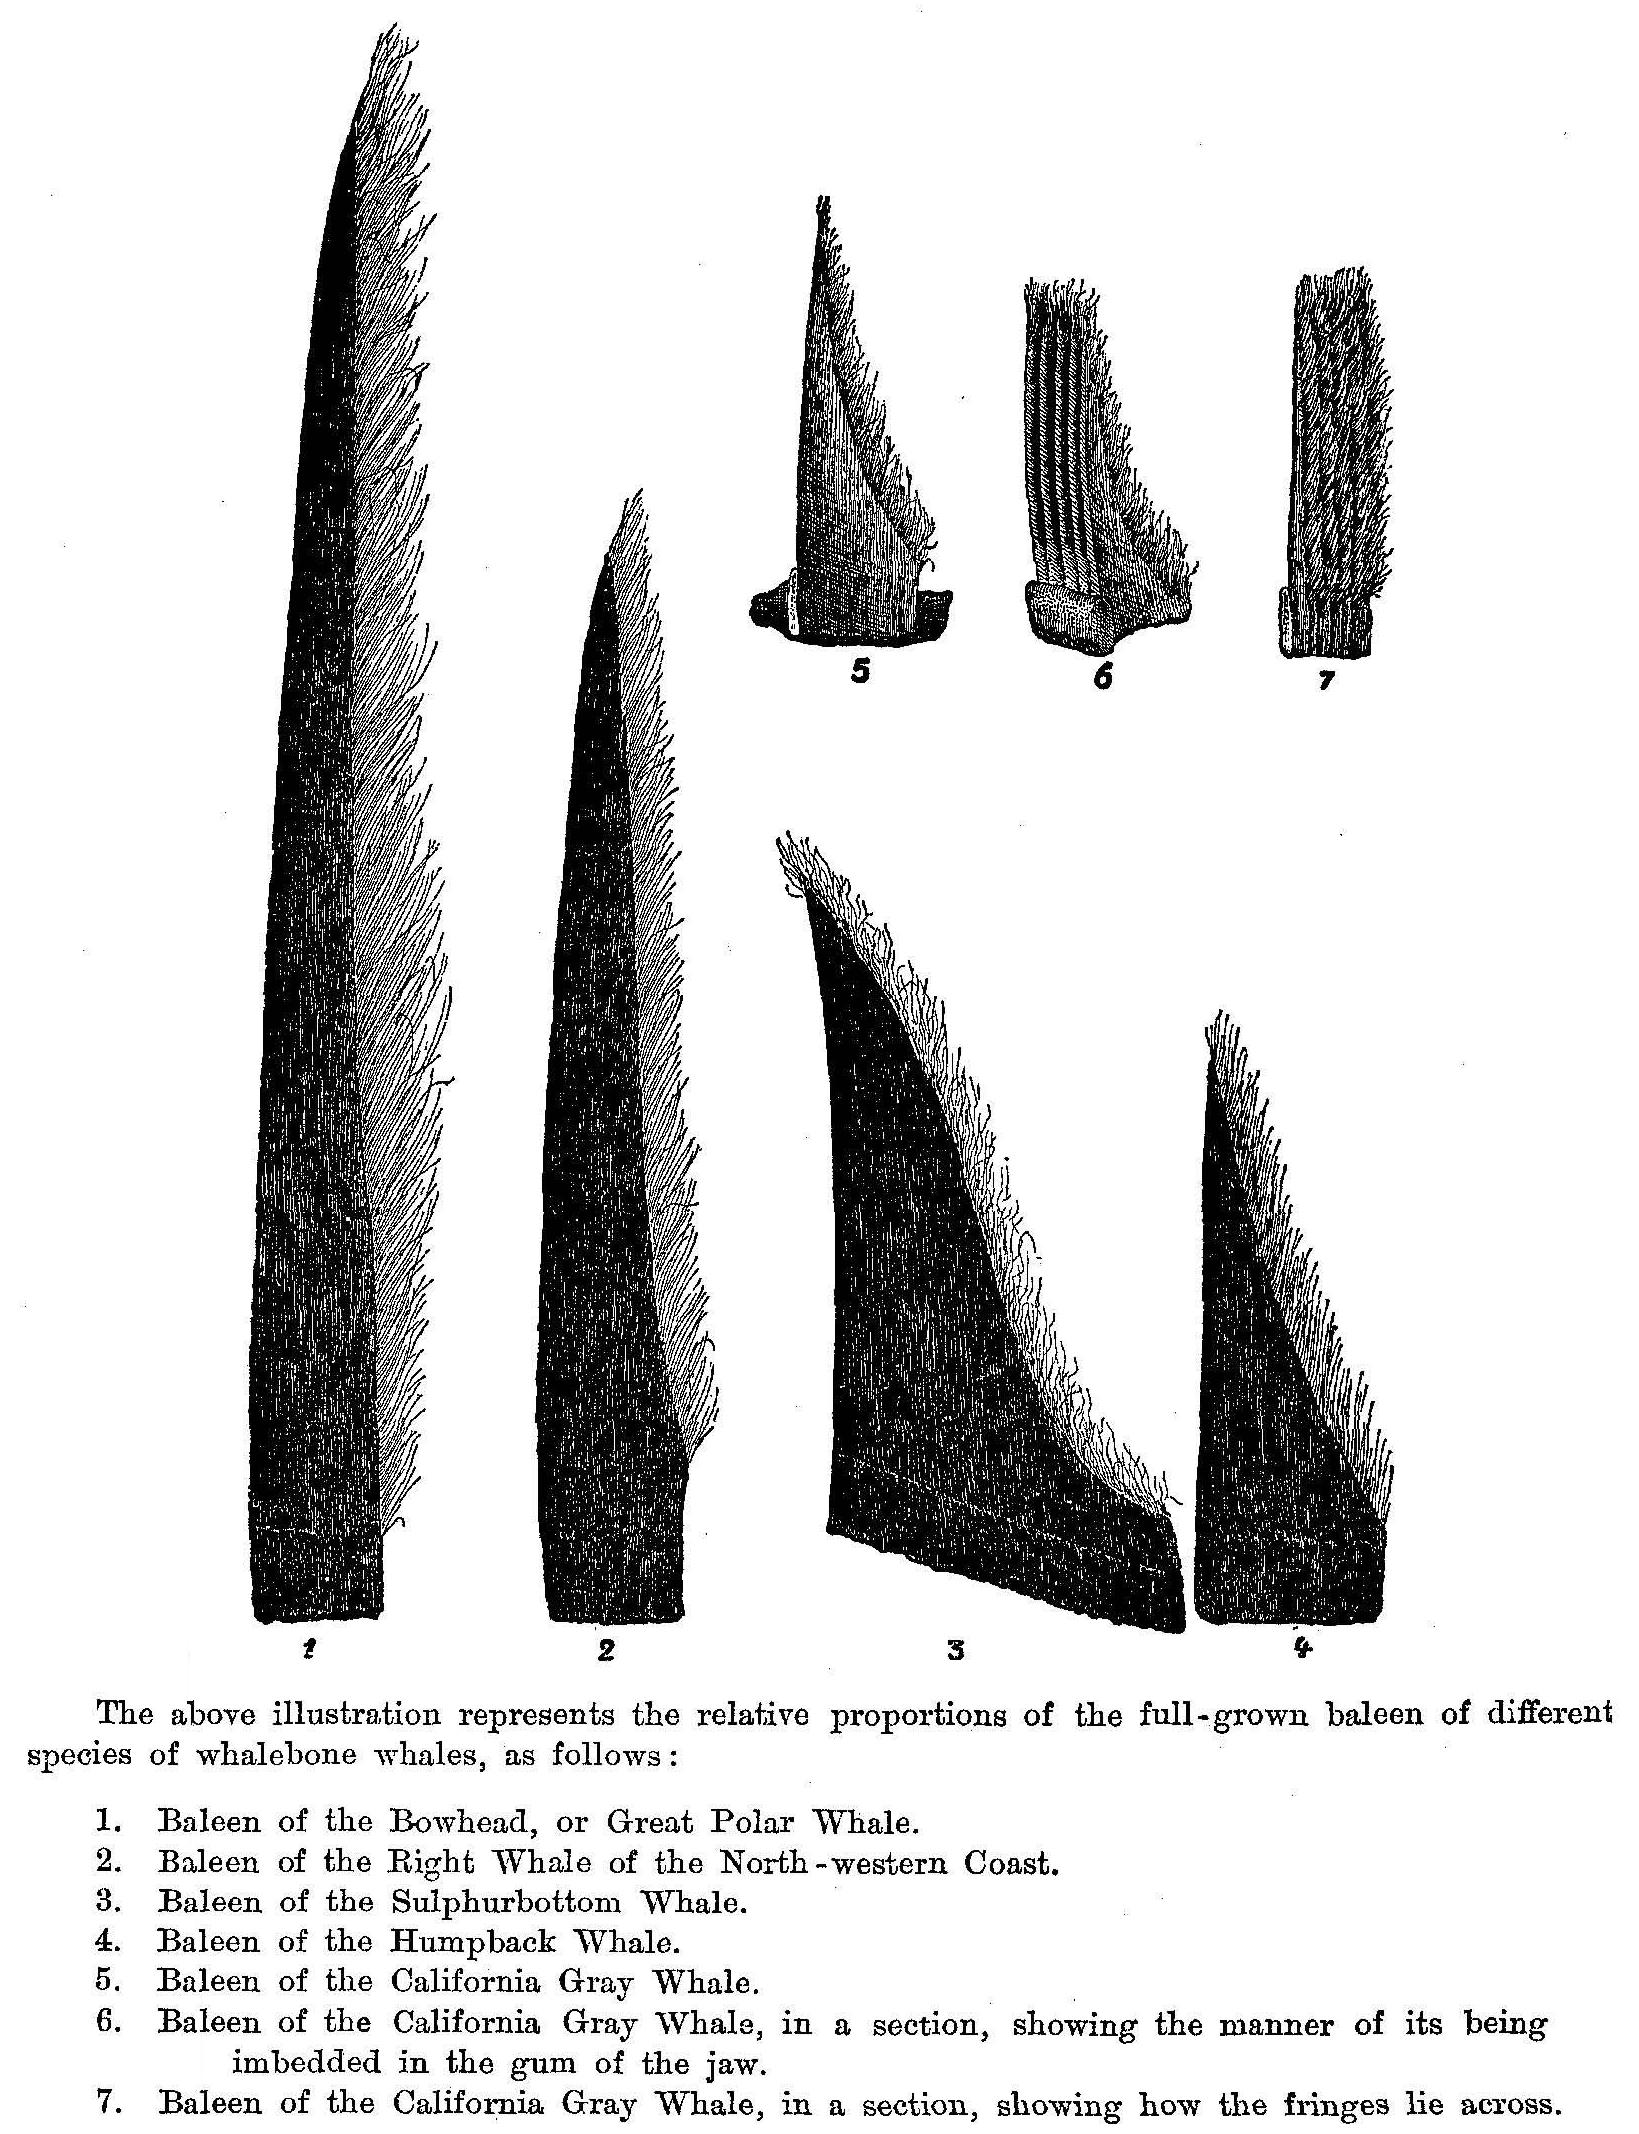 Scammon - relative proportions of the full-grown baleen of different species of whalebone whales